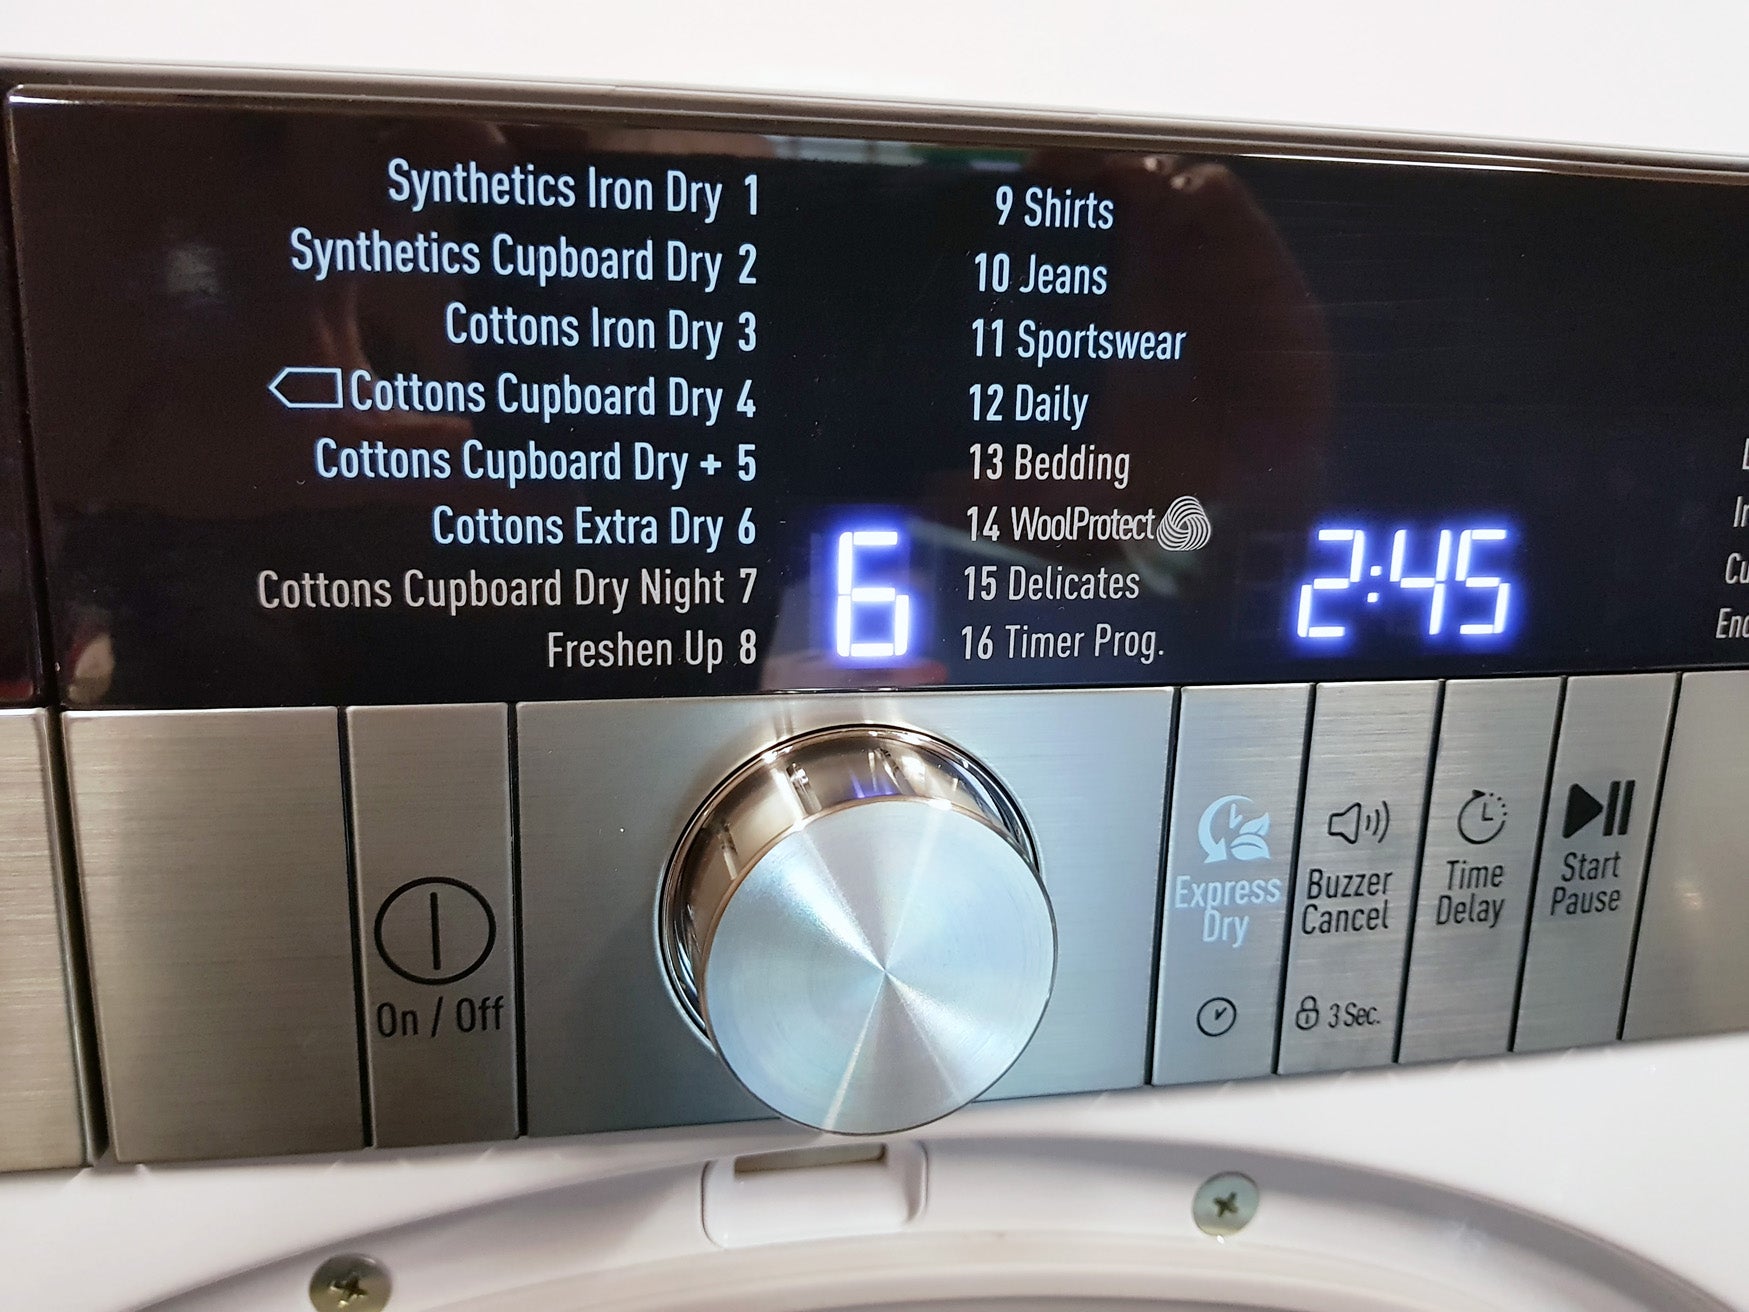 Grundig dryer control panel with program options and timer display